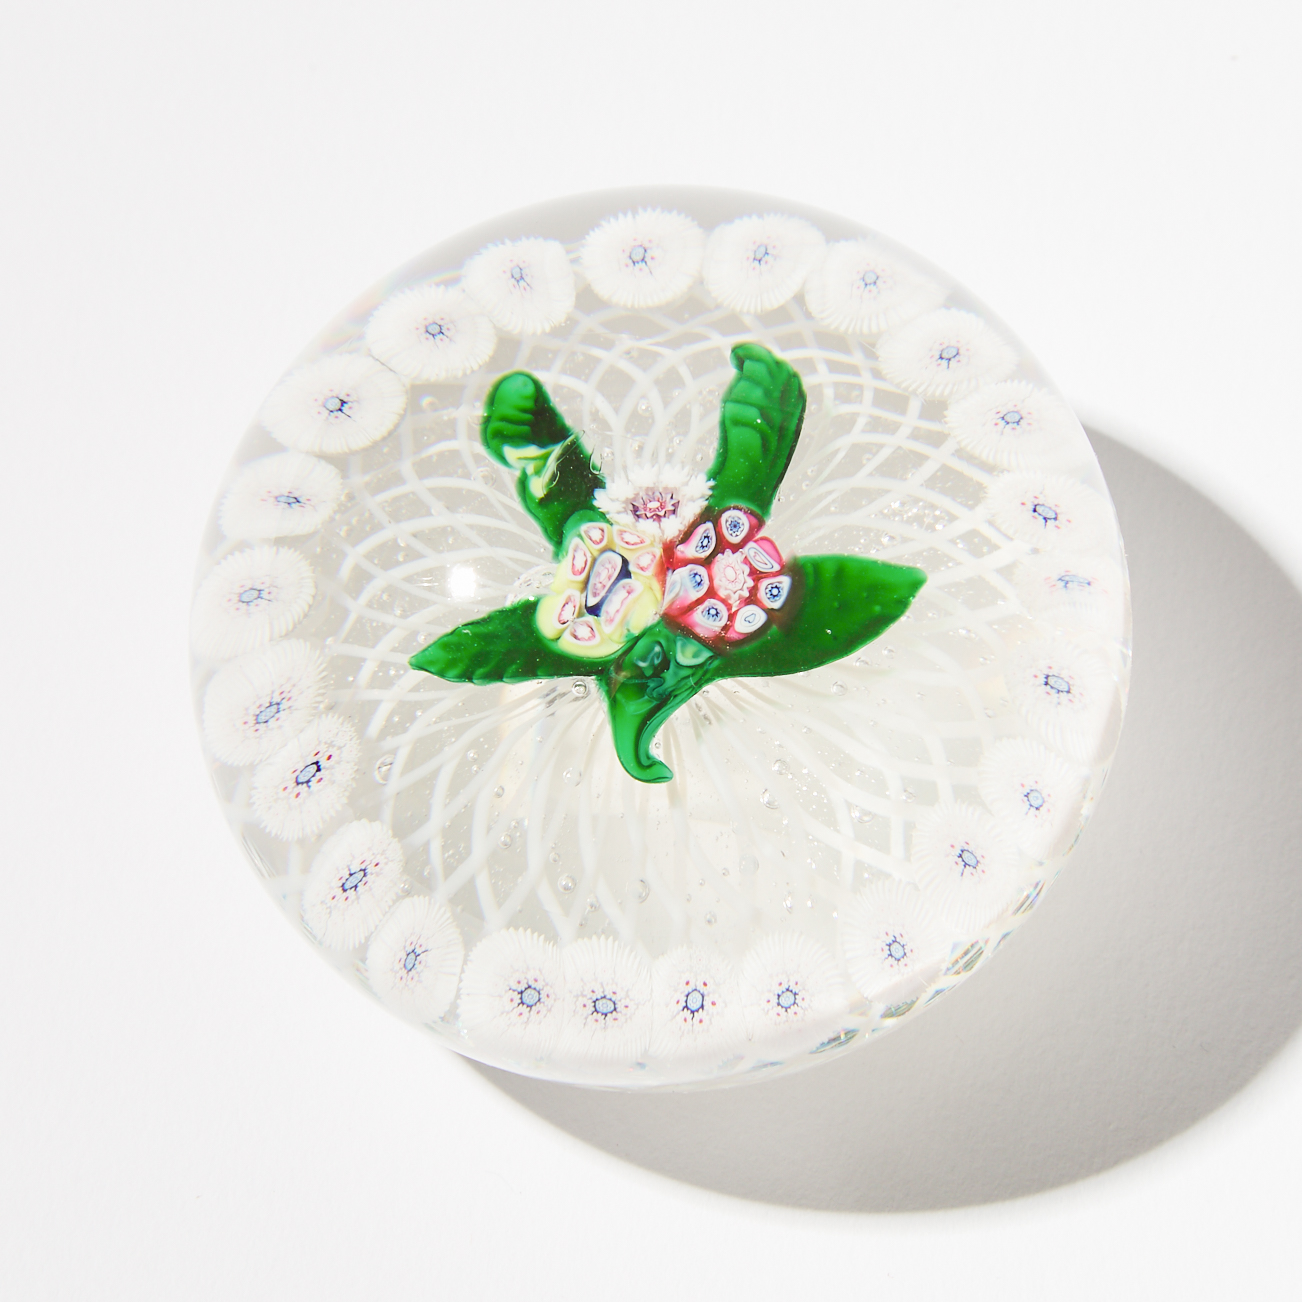 New England Glass Company, Floral Millefiori Glass Paperweight, 19th century